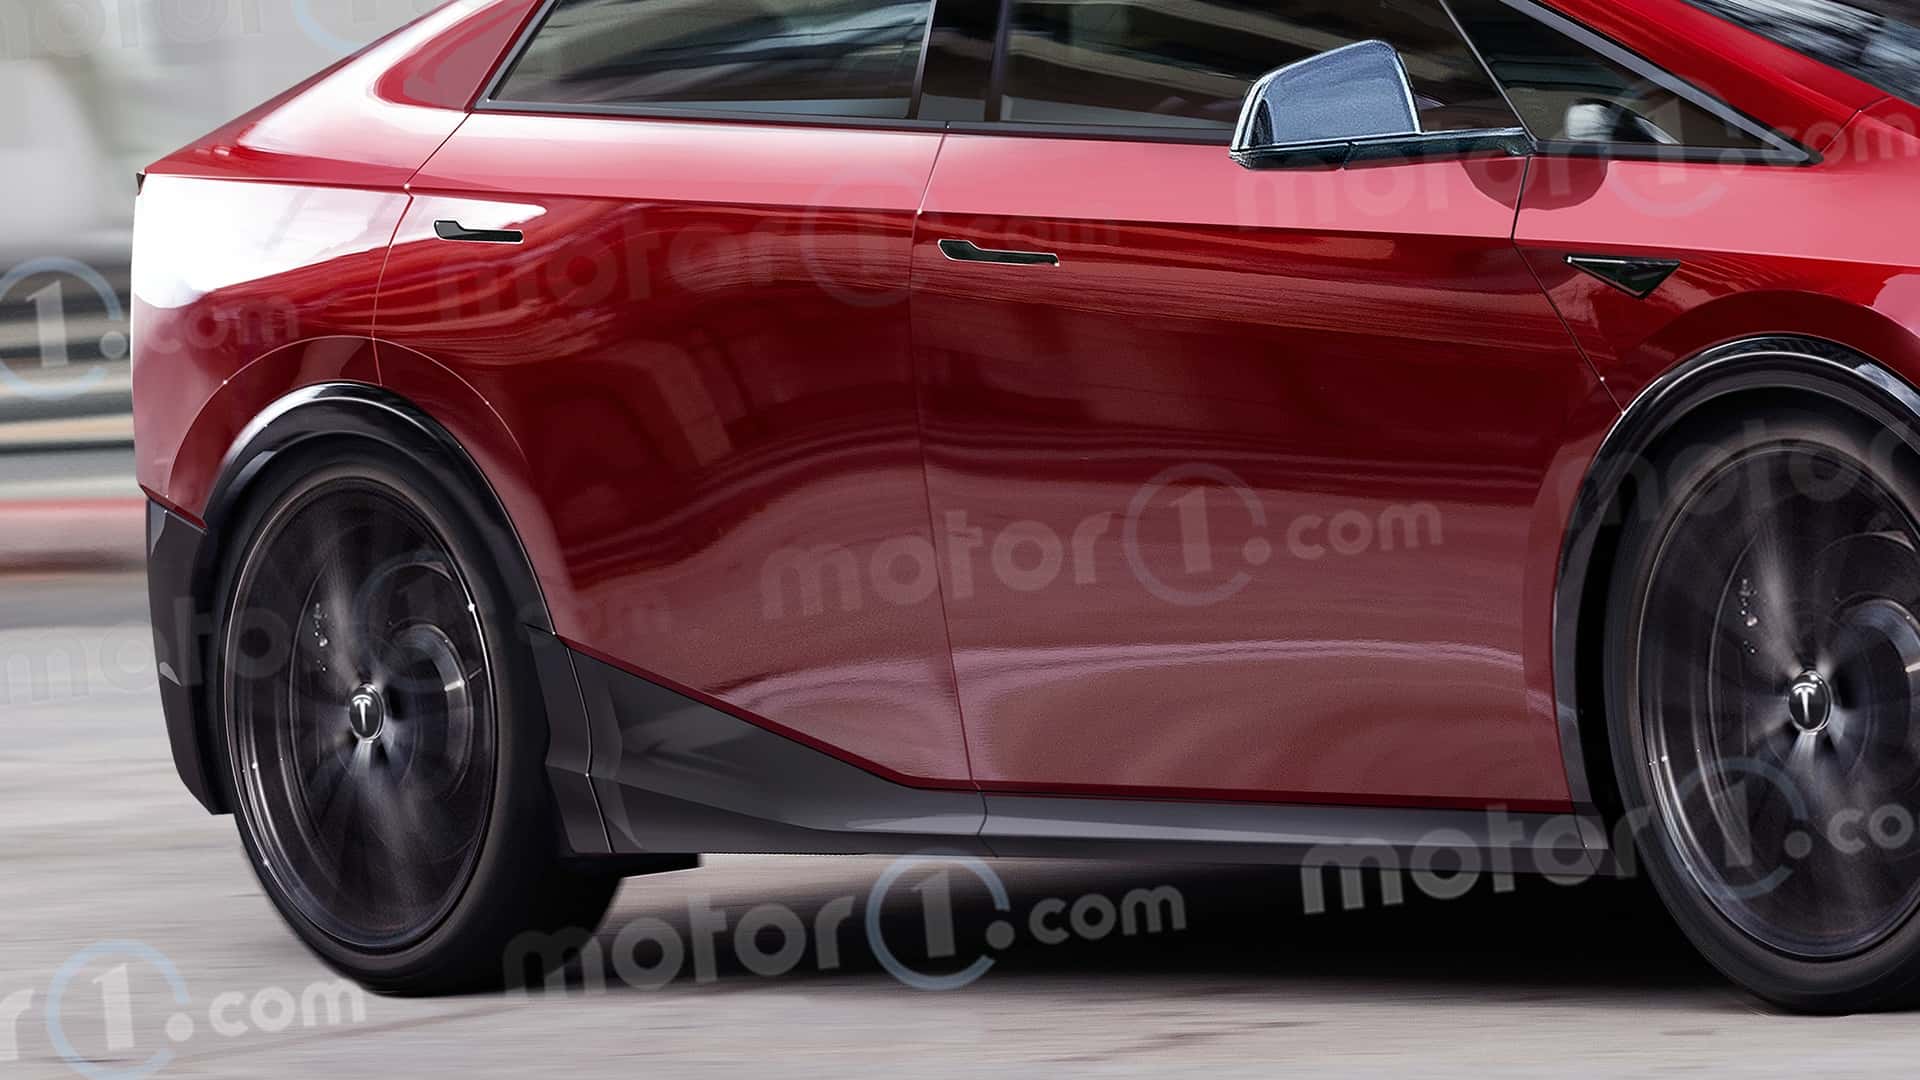 tesla's $25,000 ev rendered with 'futuristic' cybertruck cues